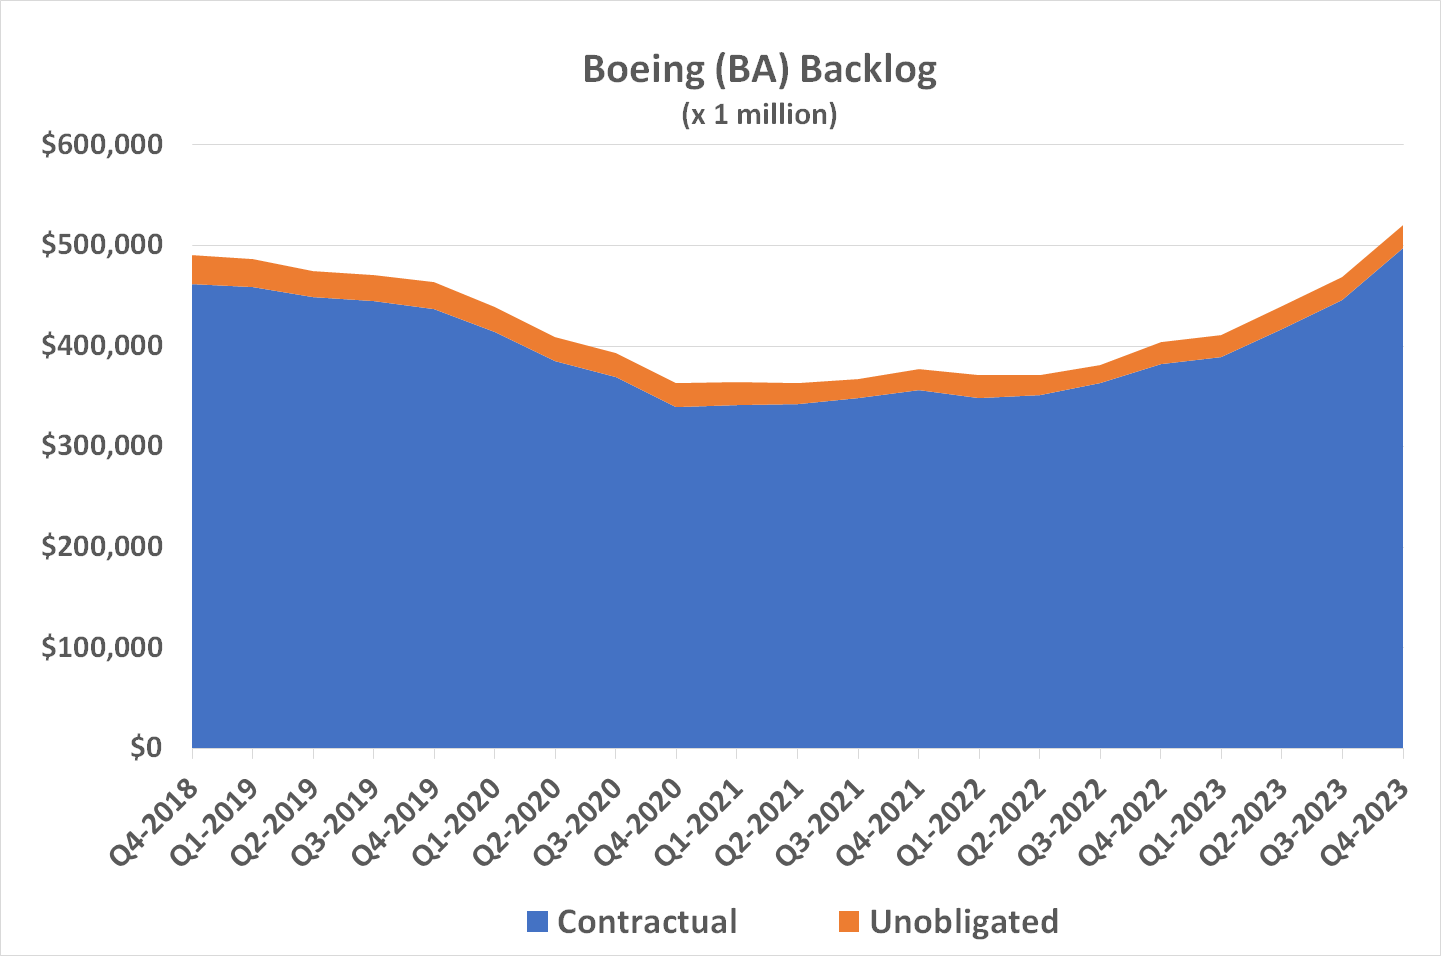 Boeing's backlog of unfilled orders for new aircraft is accelerating to multi-year highs. 